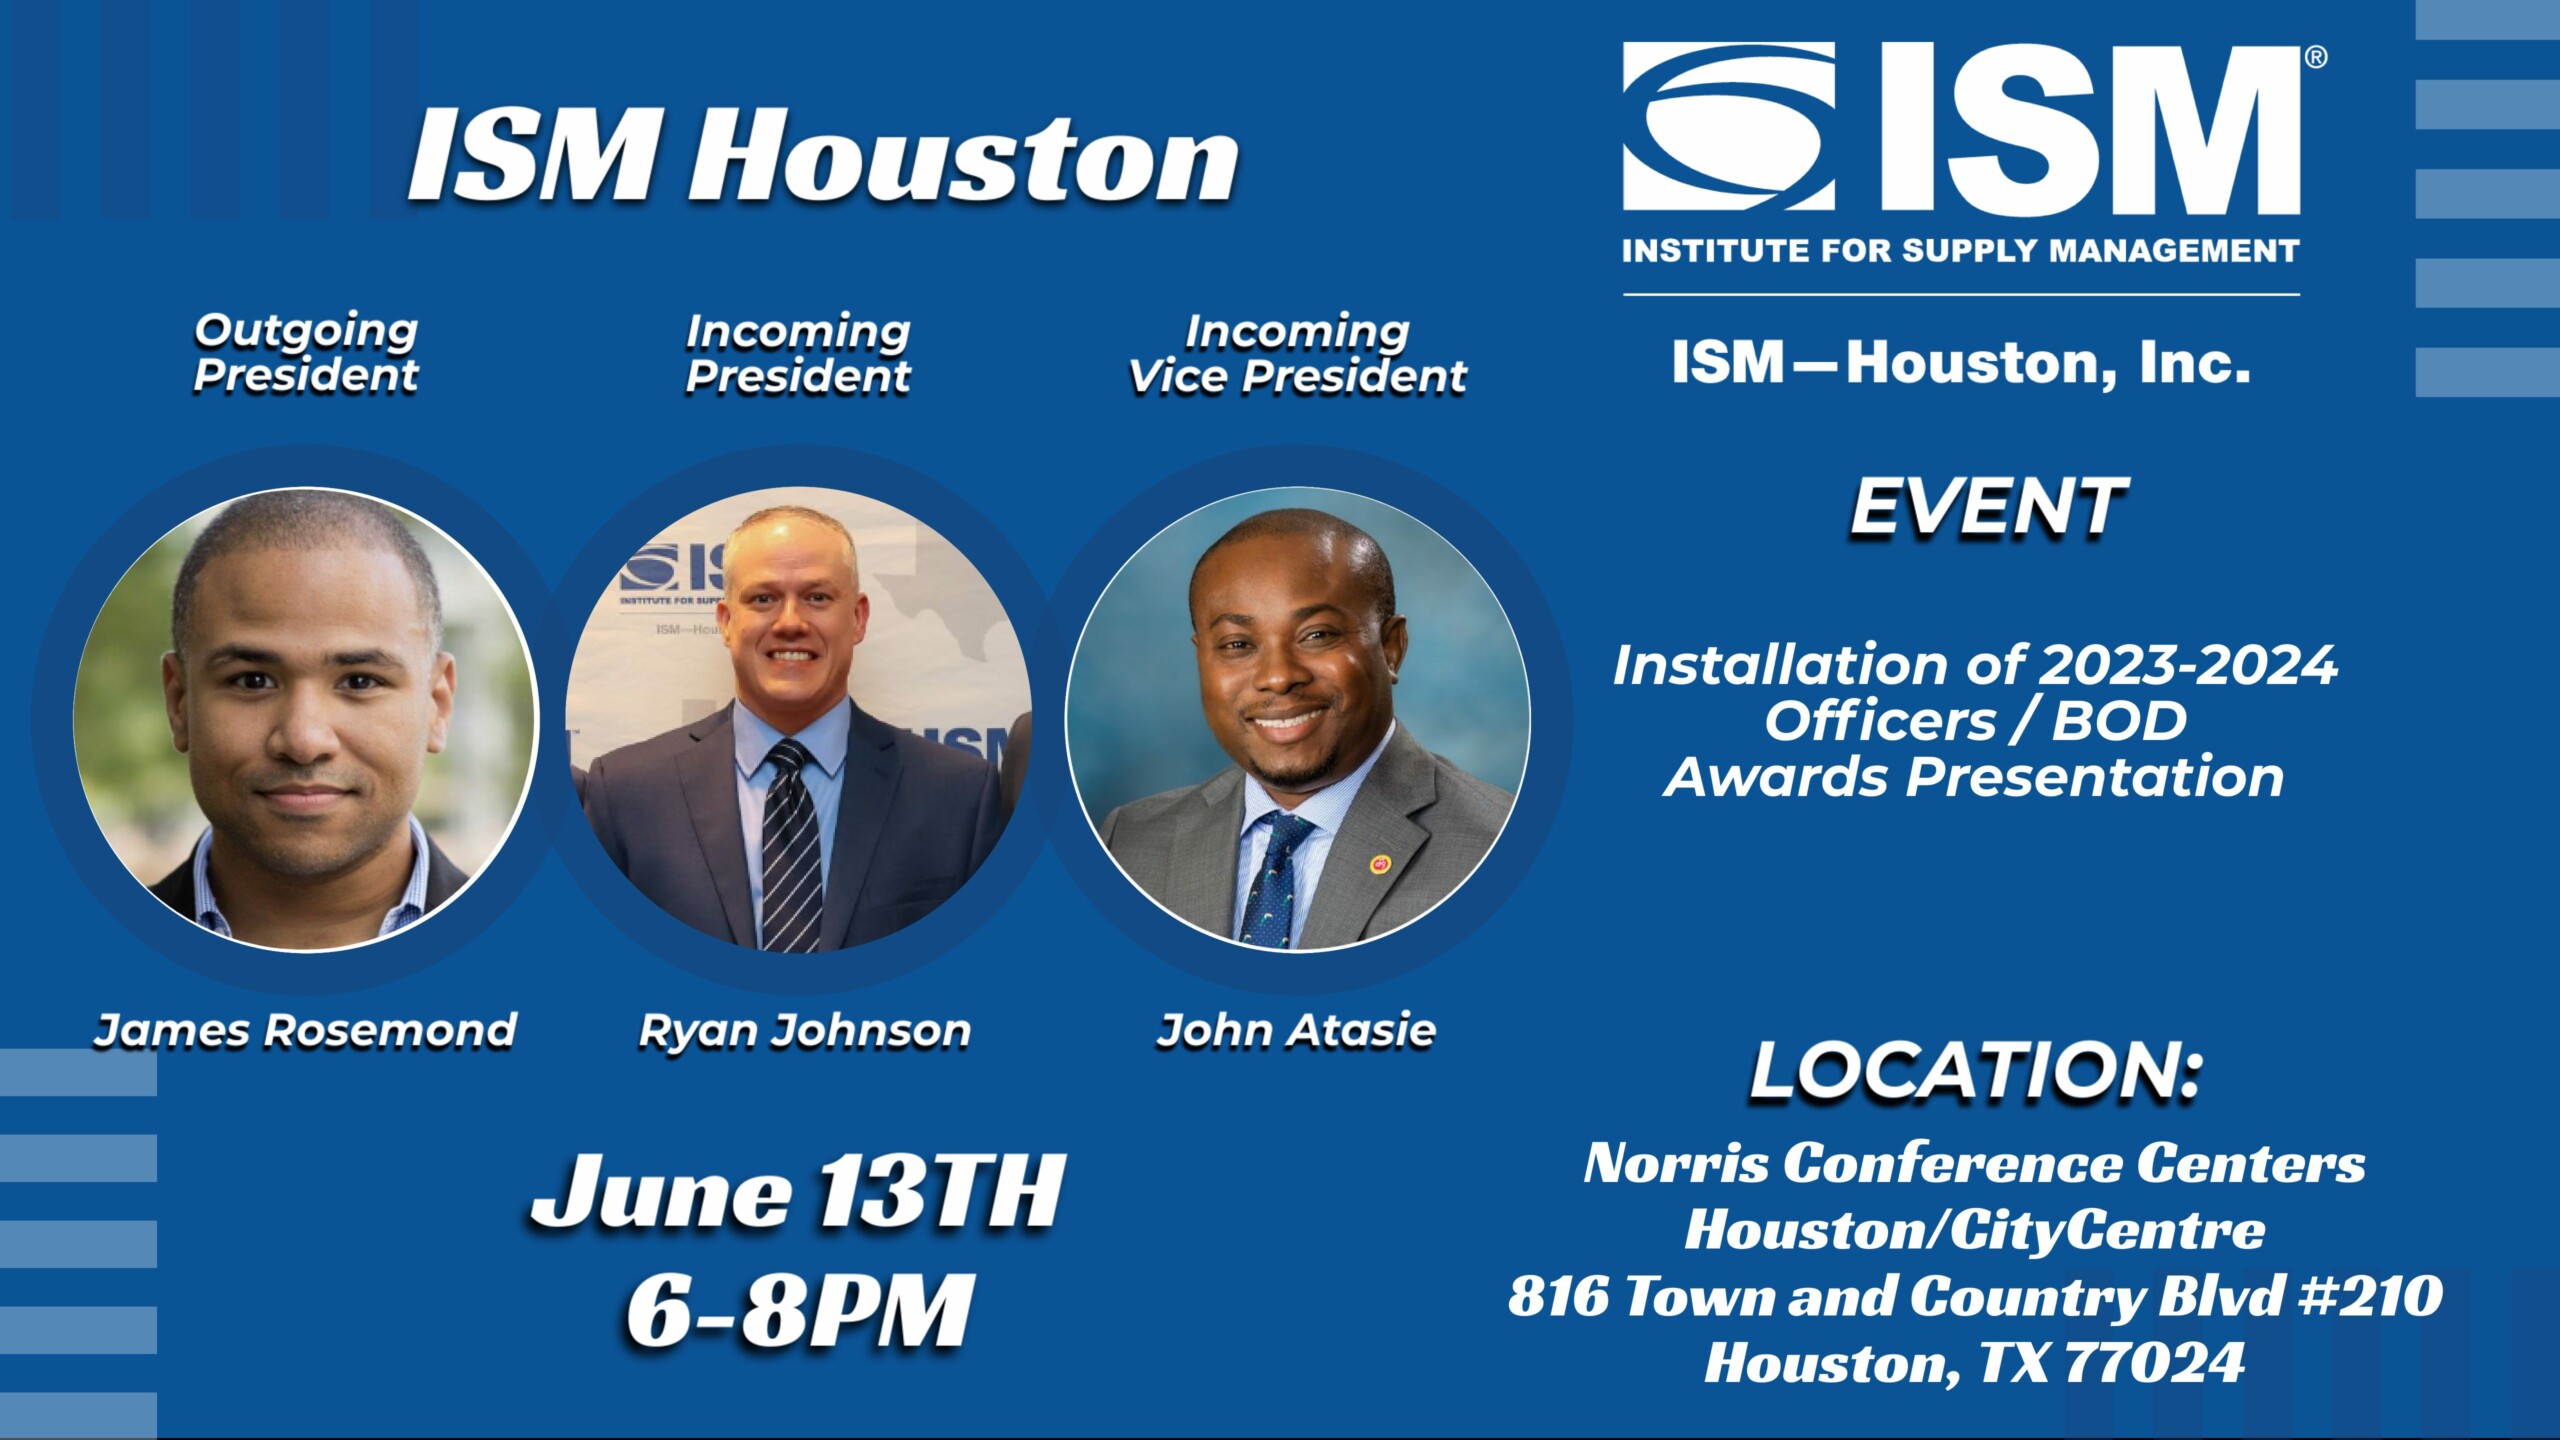 ISM-Houston Installation of 2023-2024 Officers and Awards Presentation June 13, 2023